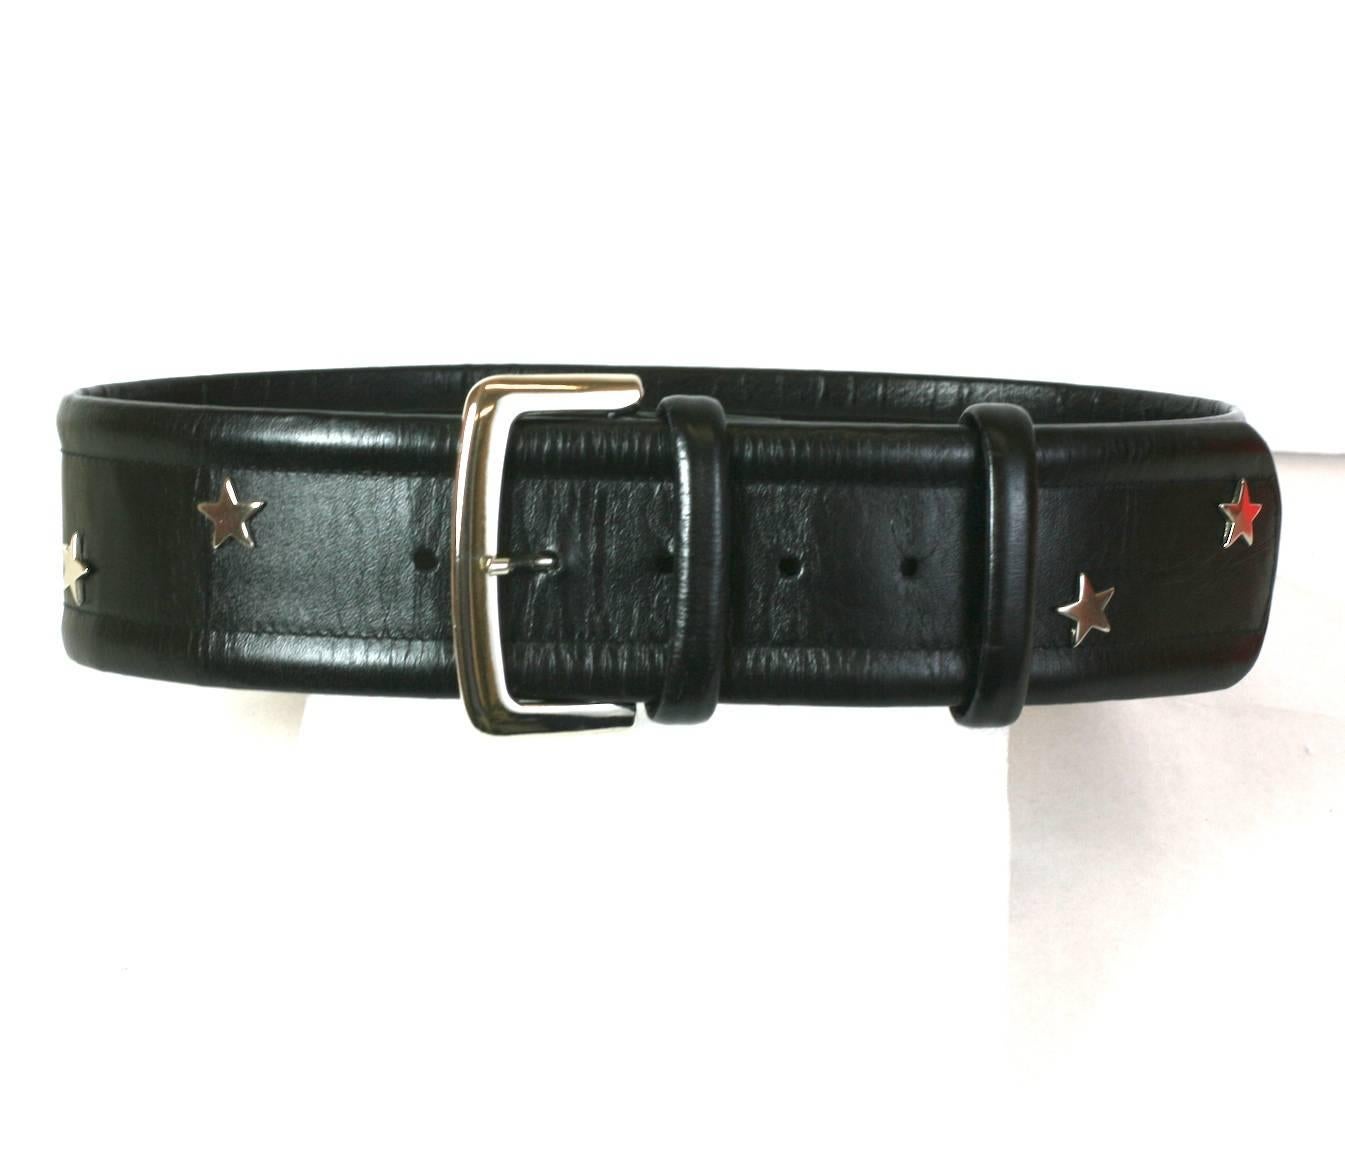 Attractive Mondi wide black leather belt, studded with chromed silver 5 point star motifs.
Excellent Condition. 1990's W. Germany.
Waist sizes 28